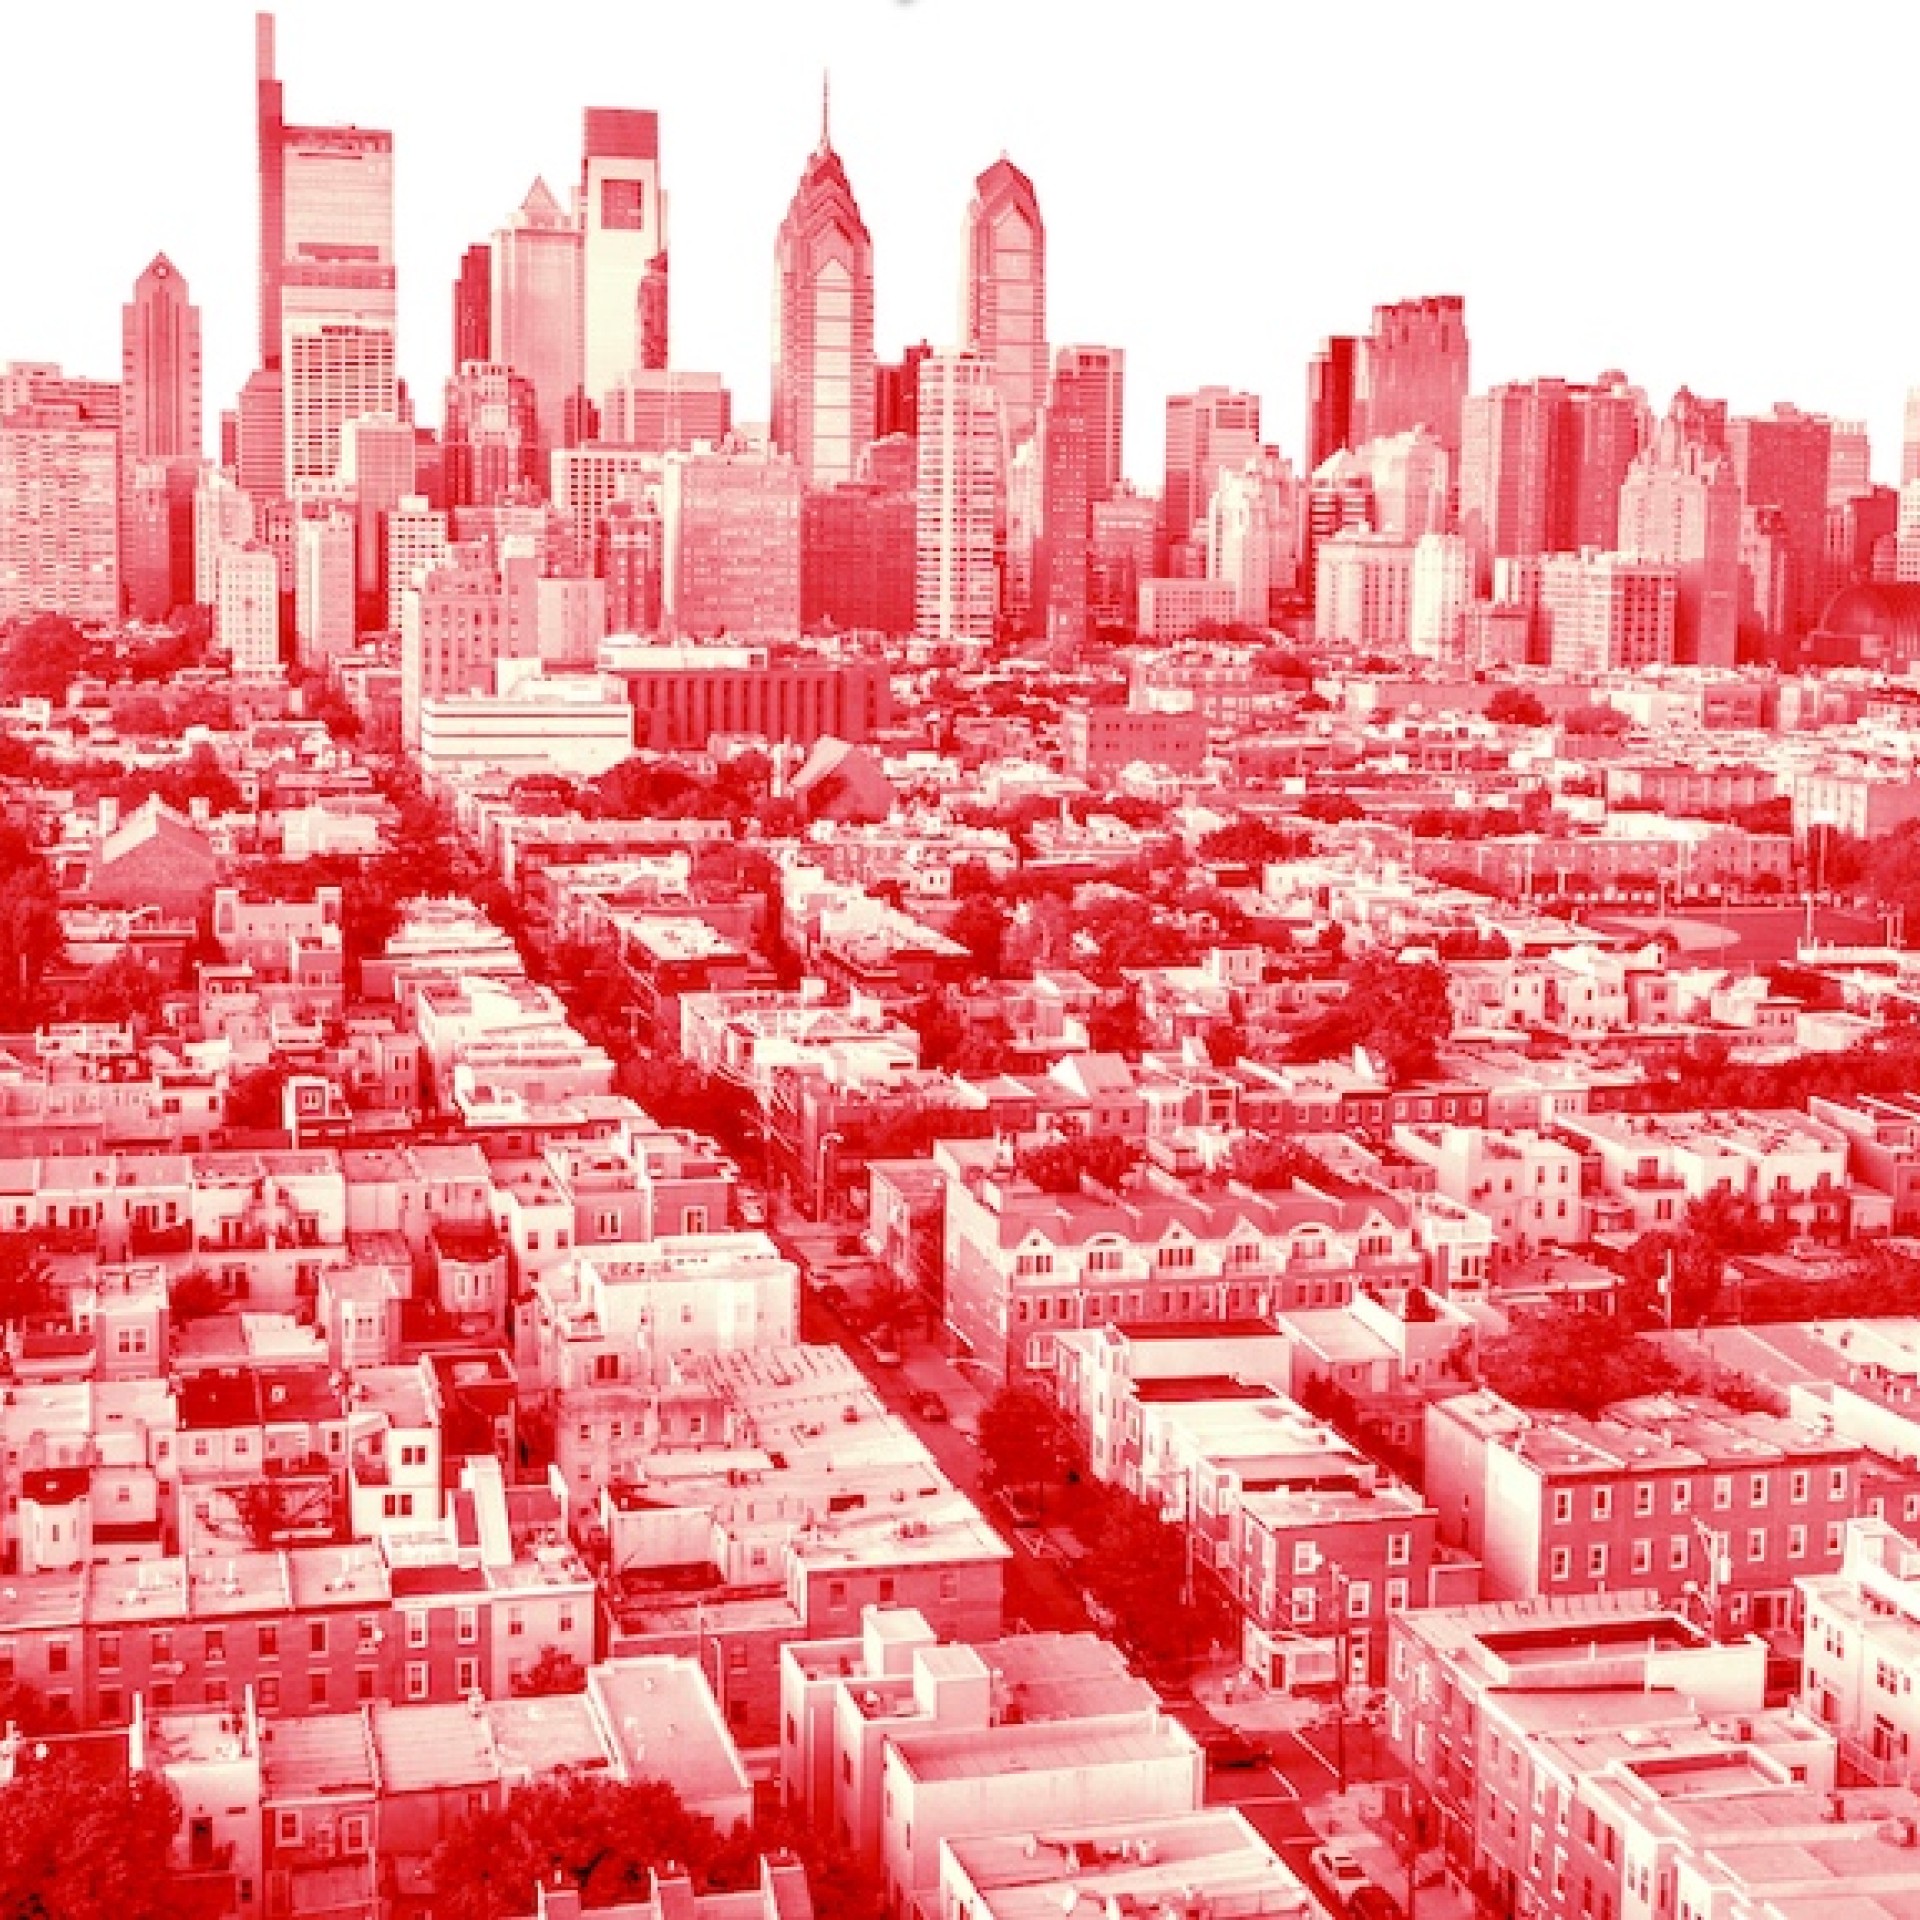 an image shows the Philly city skyline and some of the city from an aerial view in red